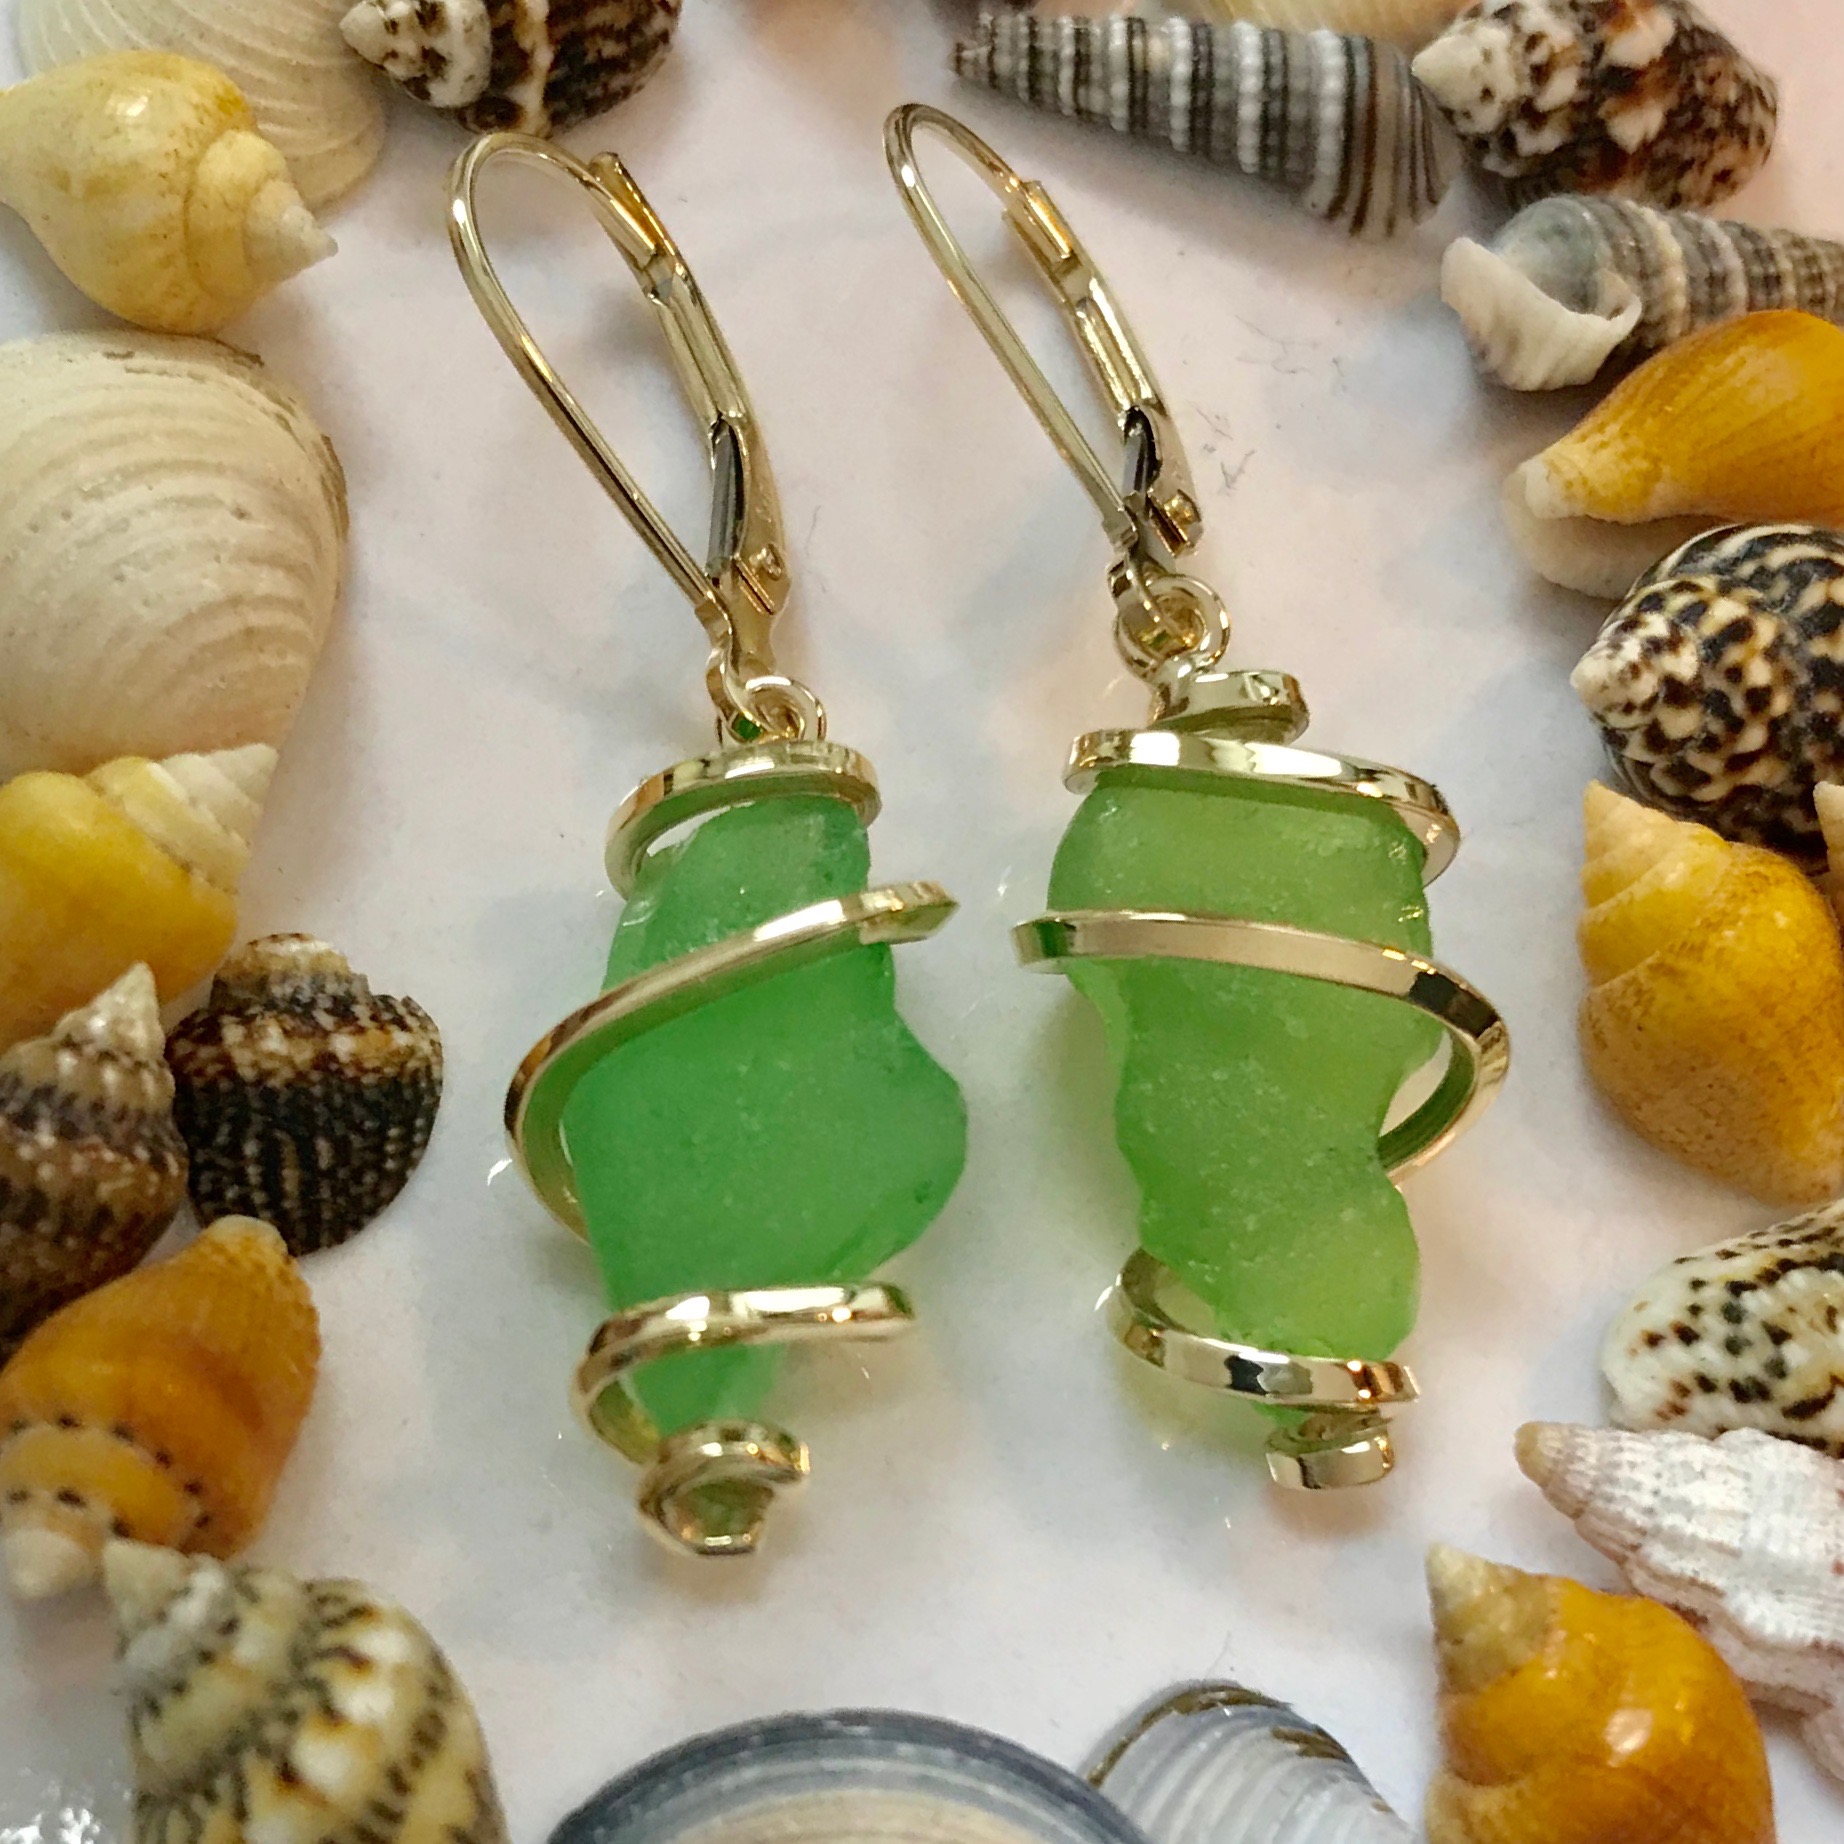 Custom Designed 14 Kt Gold Exclusive Stellor Spiral  Earrings With Plymouth Beach Glass